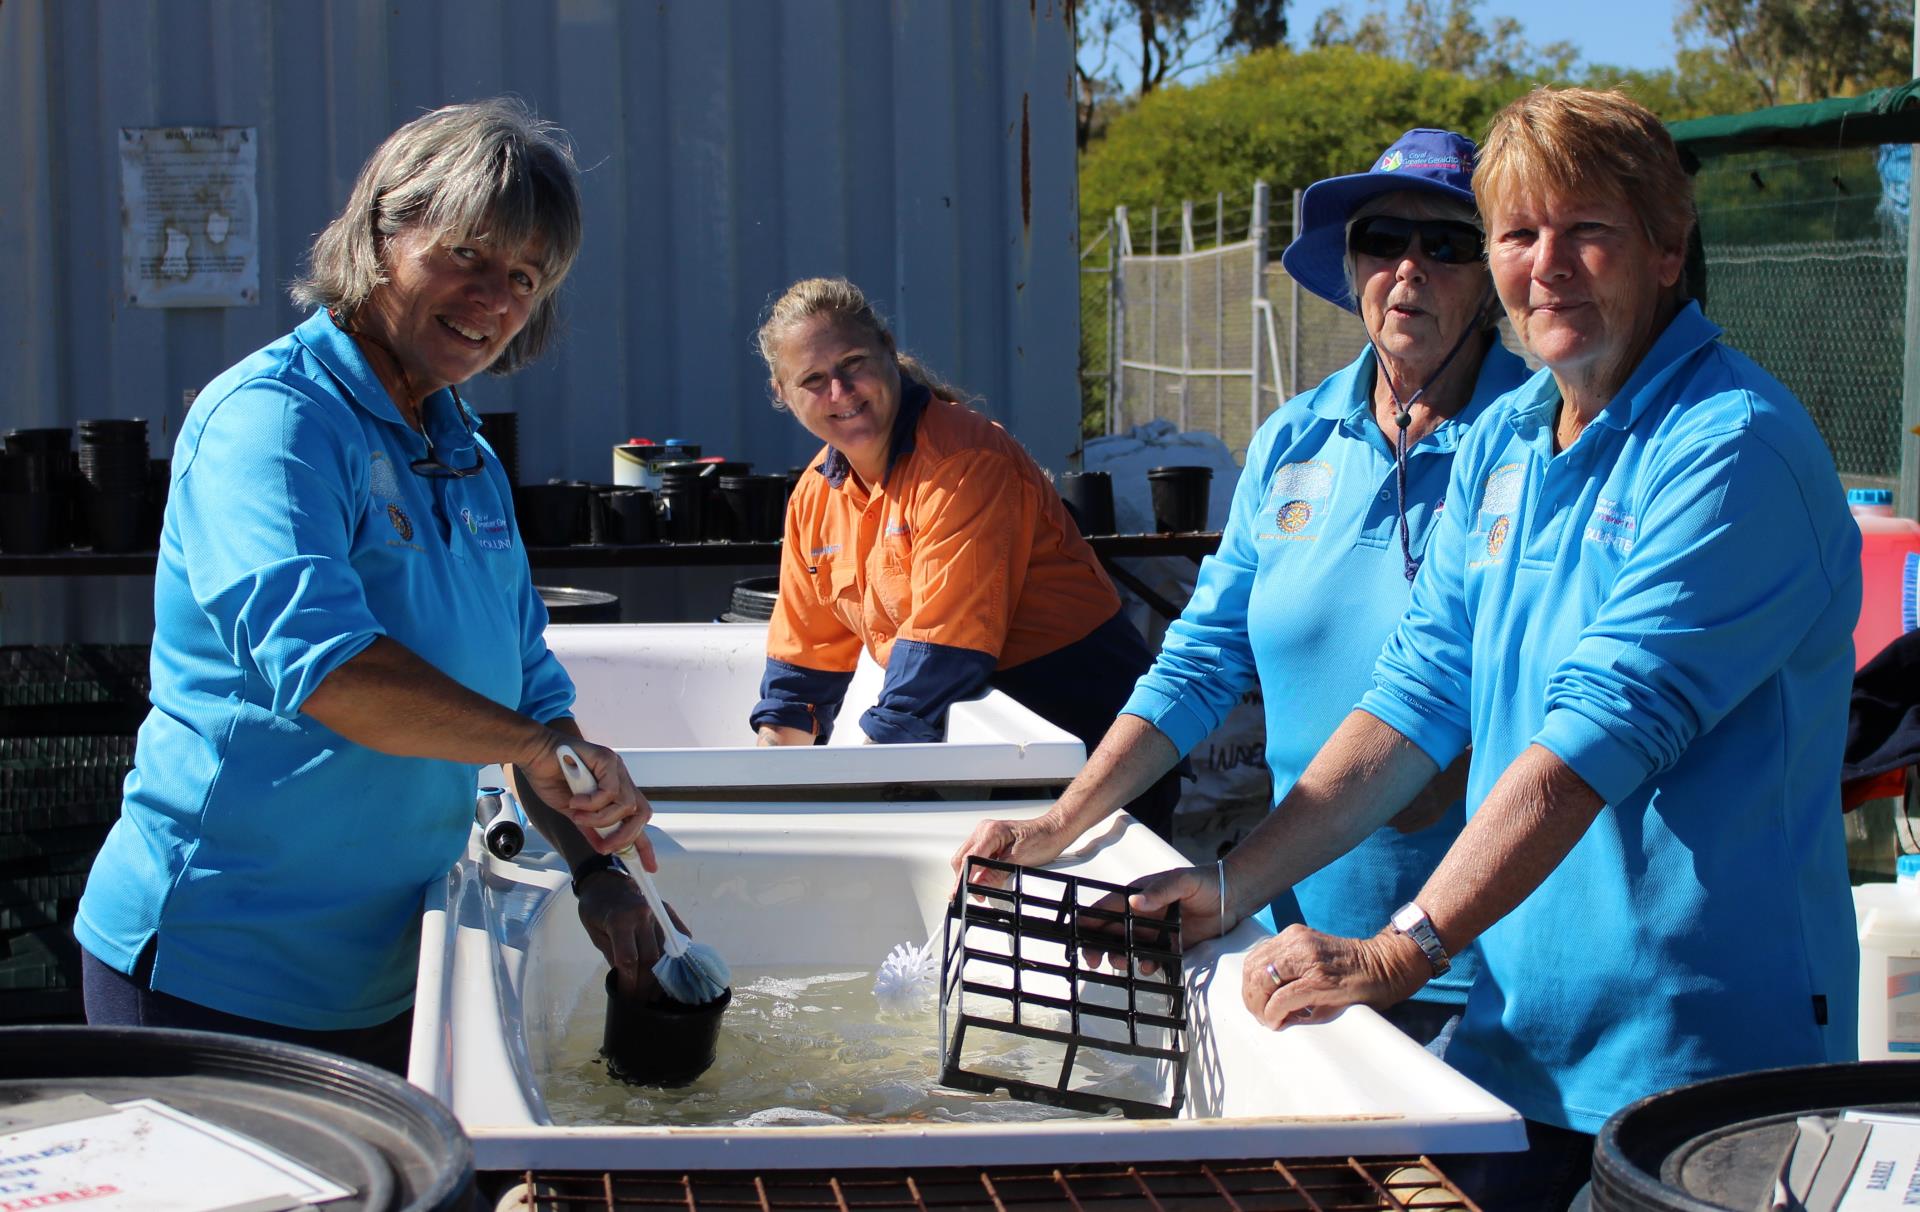 Community Nursery Officer Jeanette Reynolds (orange shirt) joins Community Nursery volunteers (from left) Anna Beyer, Cathy Barbour and Robyn Clements to wash pots and seedling tube trays in preparation for the next growing season.